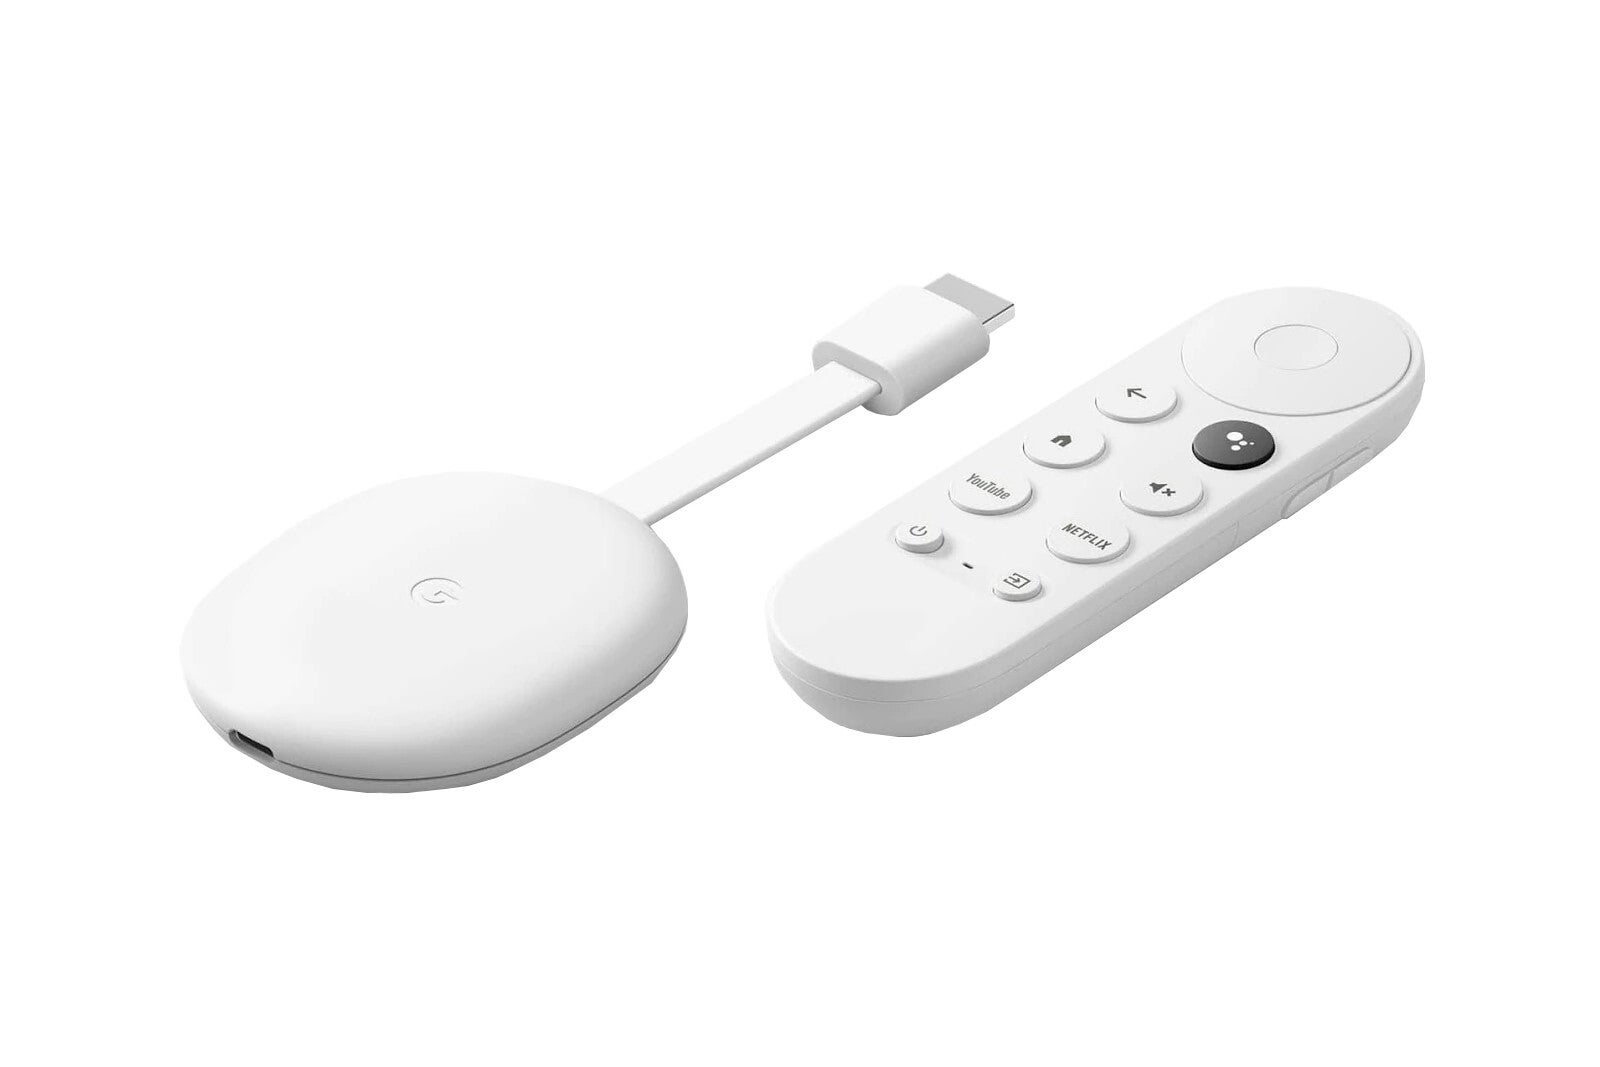 Google is offering a discounted bundle with Chromecast + Stadia Controller